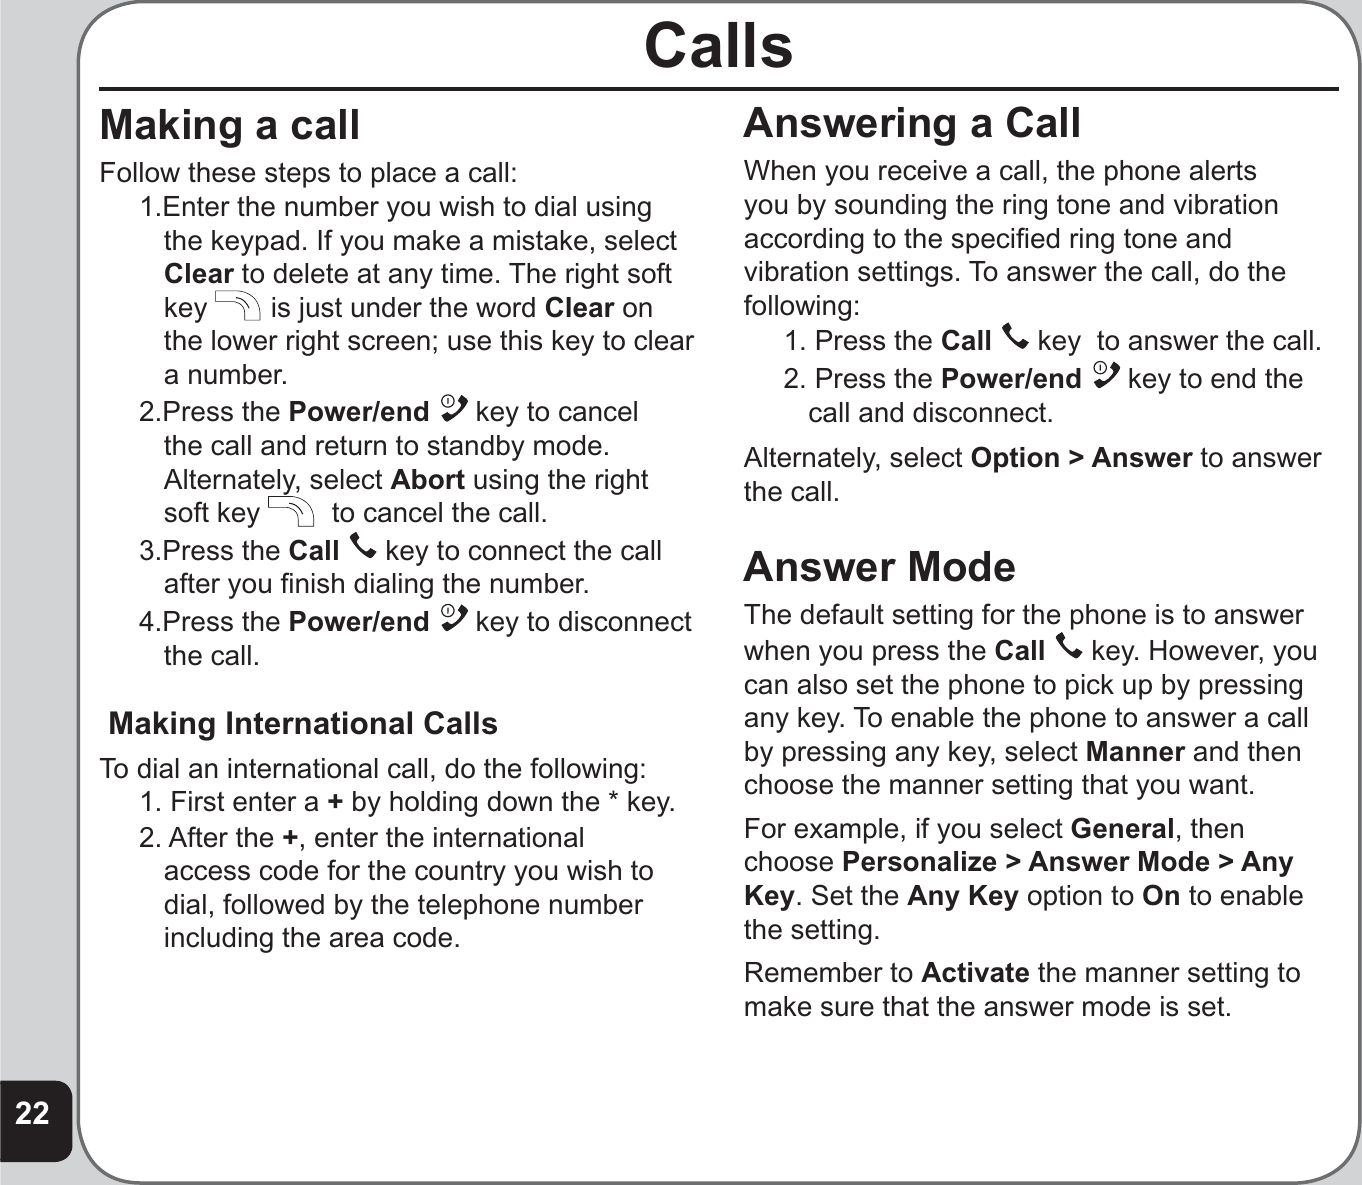 22Answering a CallWhen you receive a call, the phone alerts you by sounding the ring tone and vibration according to the speciﬁ ed ring tone and vibration settings. To answer the call, do the following:1. Press the Call  key  to answer the call.2. Press the Power/end  key to end the call and disconnect.Alternately, select Option &gt; Answer to answer the call.Answer ModeThe default setting for the phone is to answer when you press the Call  key. However, you can also set the phone to pick up by pressing any key. To enable the phone to answer a call by pressing any key, select Manner and then choose the manner setting that you want. For example, if you select General, then choose Personalize &gt; Answer Mode &gt; Any Key. Set the Any Key option to On to enable the setting. Remember to Activate the manner setting to make sure that the answer mode is set.CallsMaking a callFollow these steps to place a call:1.Enter the number you wish to dial using the keypad. If you make a mistake, select Clear to delete at any time. The right soft key  is just under the word Clear onthe lower right screen; use this key to clear a number.2.Press the Power/end  key to cancel the call and return to standby mode. Alternately, select Abort using the right soft key   to cancel the call.3.Press the Call  key to connect the call after you ﬁ nish dialing the number.4.Press the Power/end  key to disconnect the call. Making International CallsTo dial an international call, do the following:1. First enter a + by holding down the * key.2. After the +, enter the international access code for the country you wish to dial, followed by the telephone number including the area code.